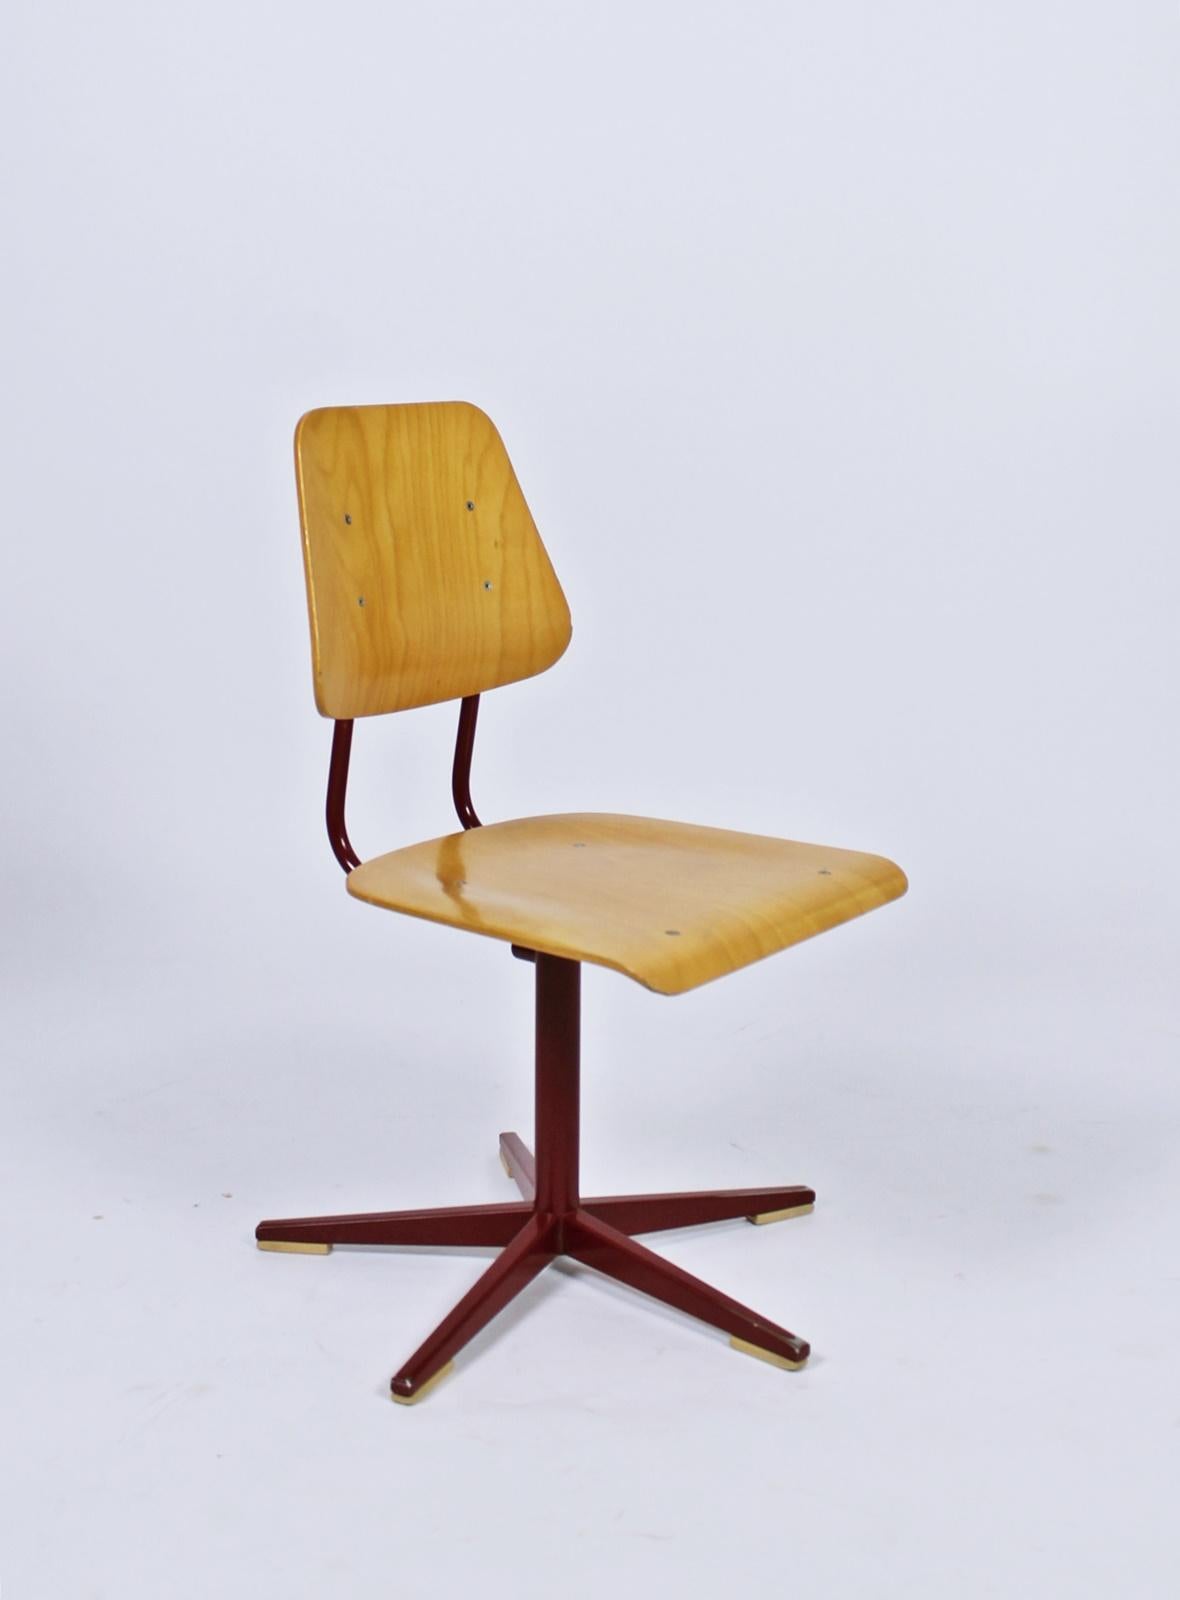 Vintage 1960s Swiss made Embru school chairs, made of plywood and enameled steel. With adjustable height. Five leg star base. Fully original condition.
Dimensions:
Height 71-86 cm
Width 37 cm
Depth 45 cm
Seat height 35-50 cm.